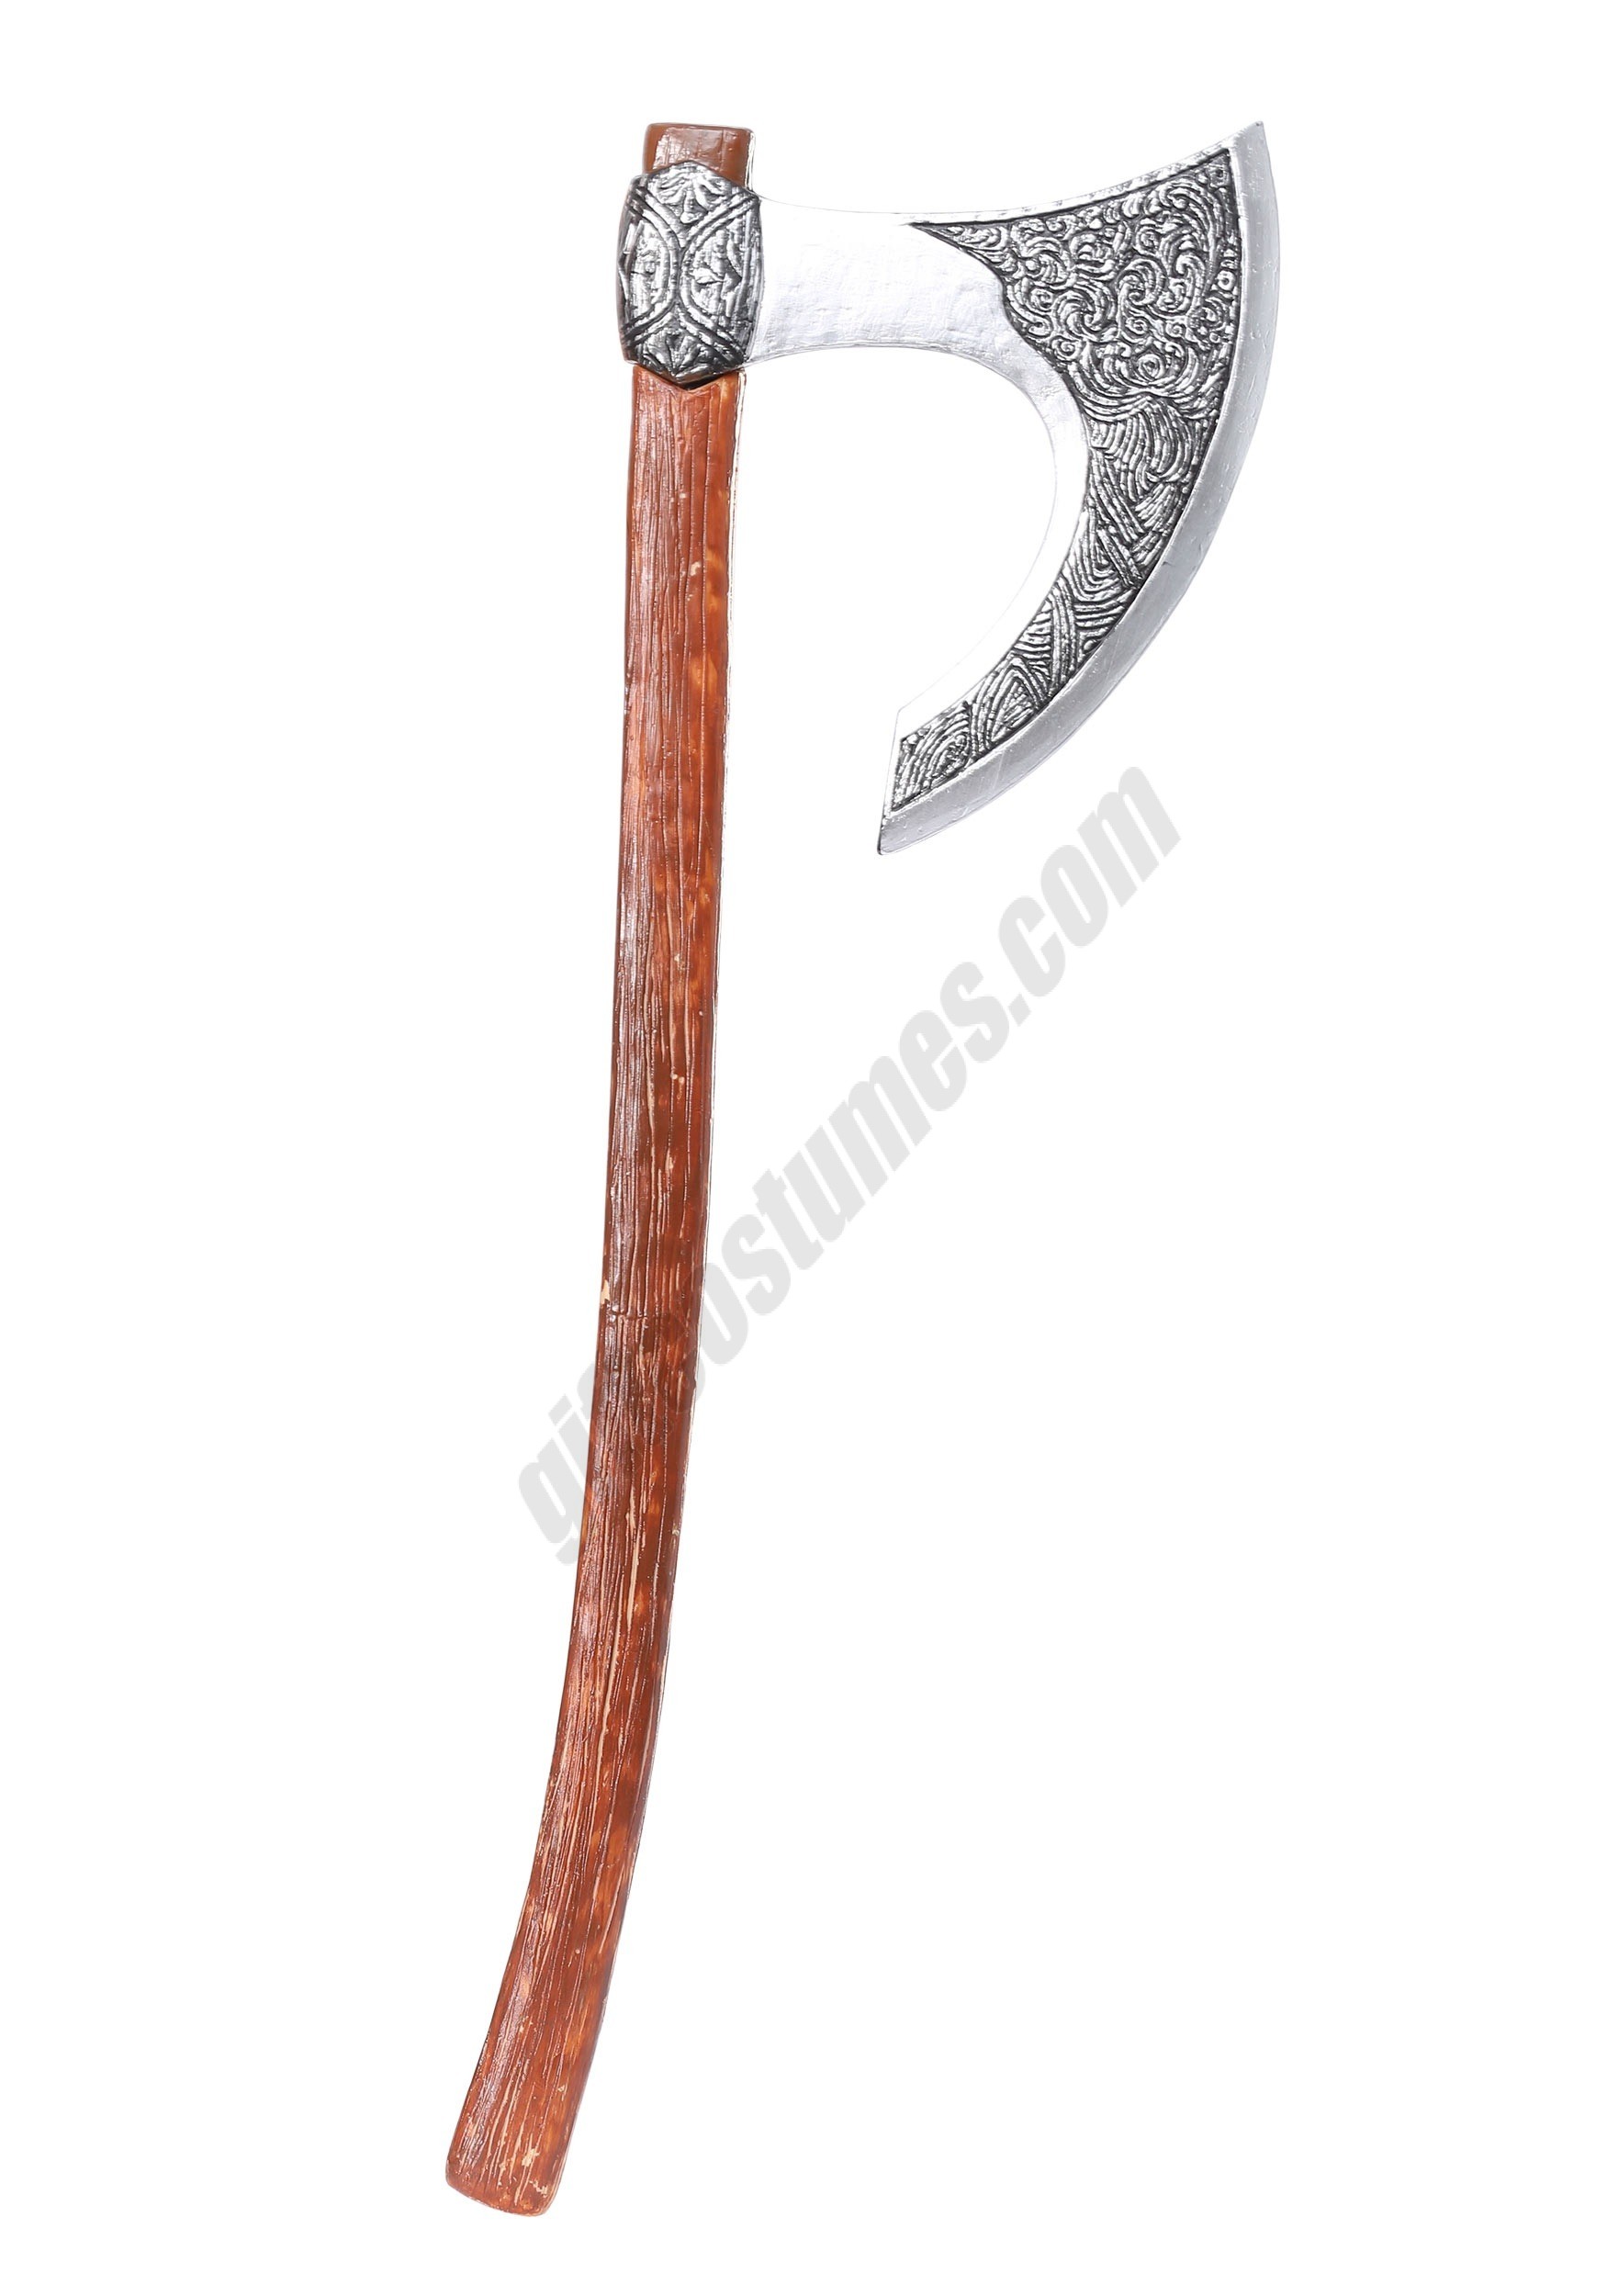 Two Handed Viking Axe Promotions - Two Handed Viking Axe Promotions